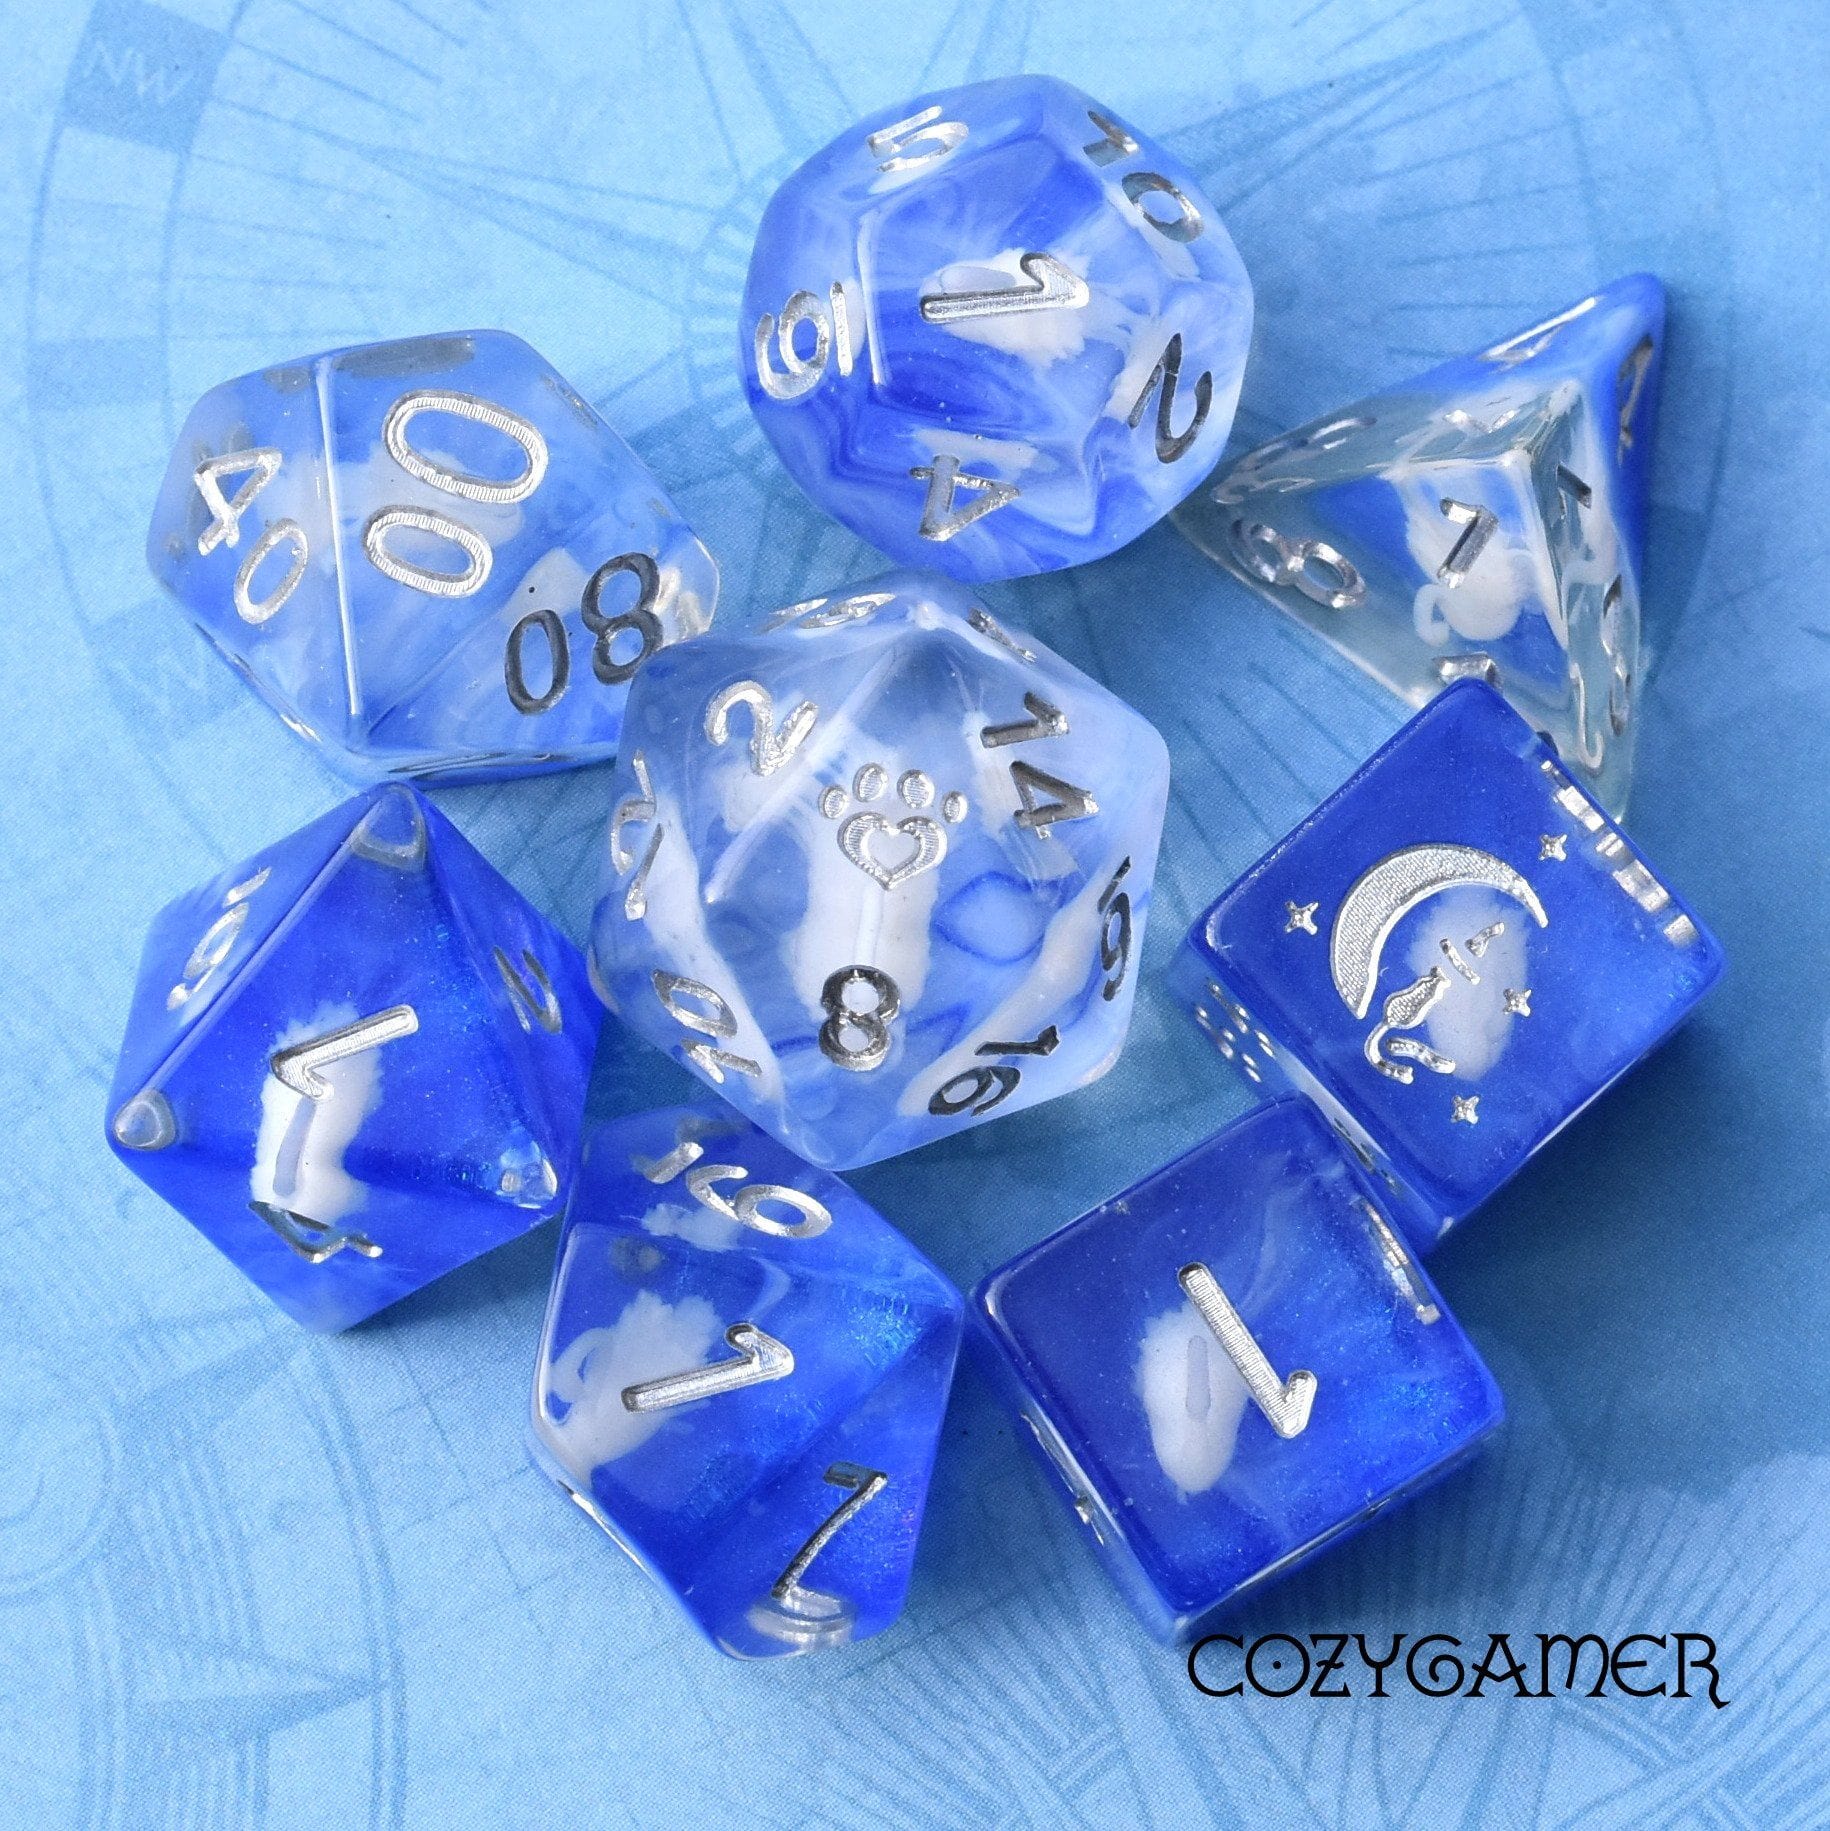 White Swan Dice Set. 8 Piece delicate white swan on water dice set